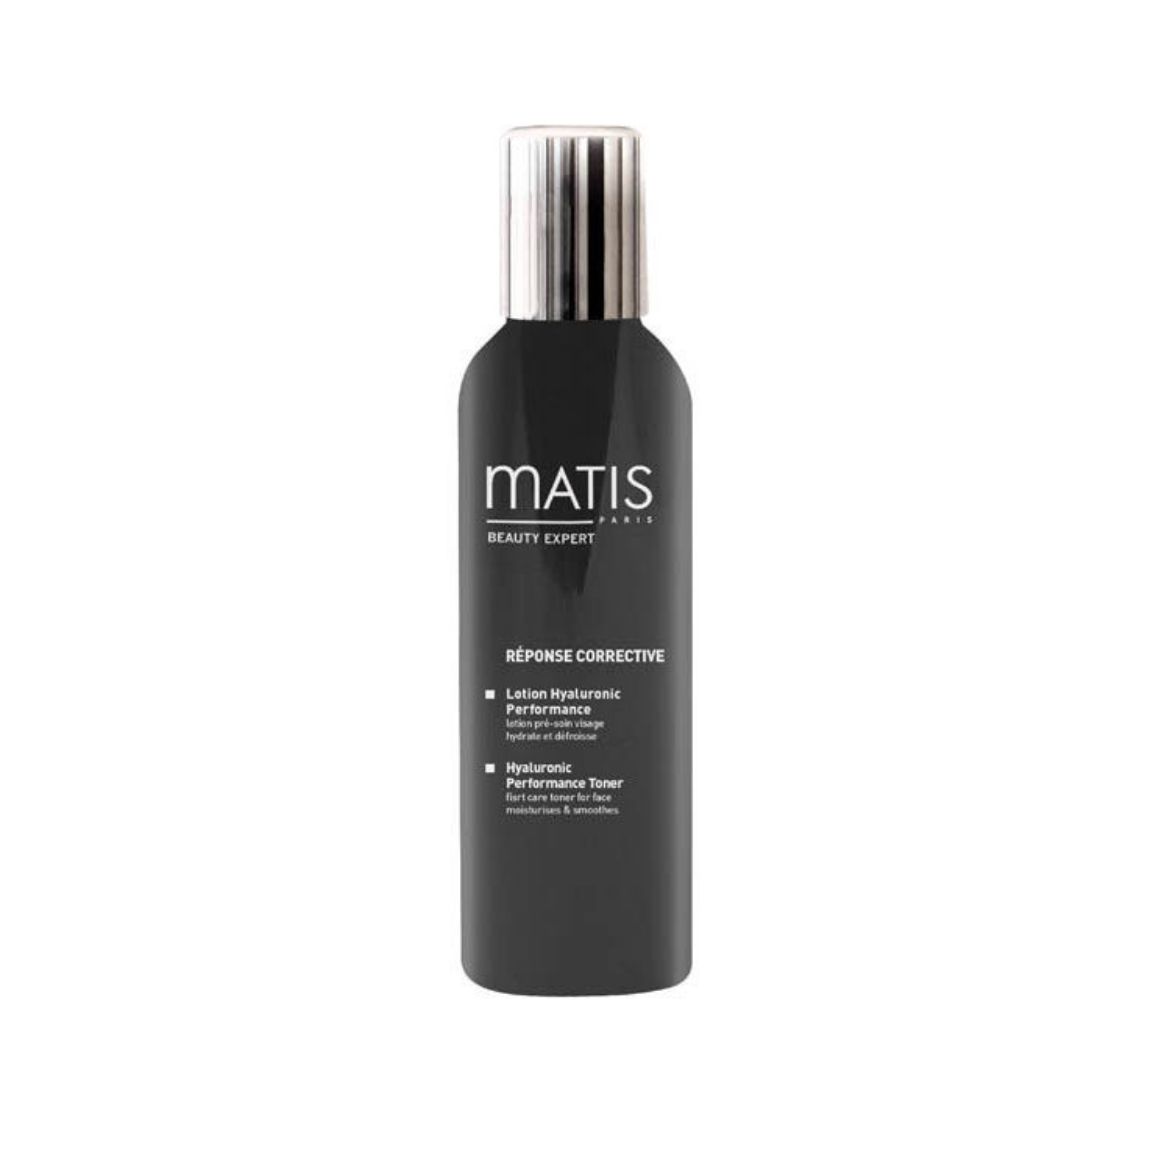 Image of Matis Lotion Hyaluronic Performance (200ml)